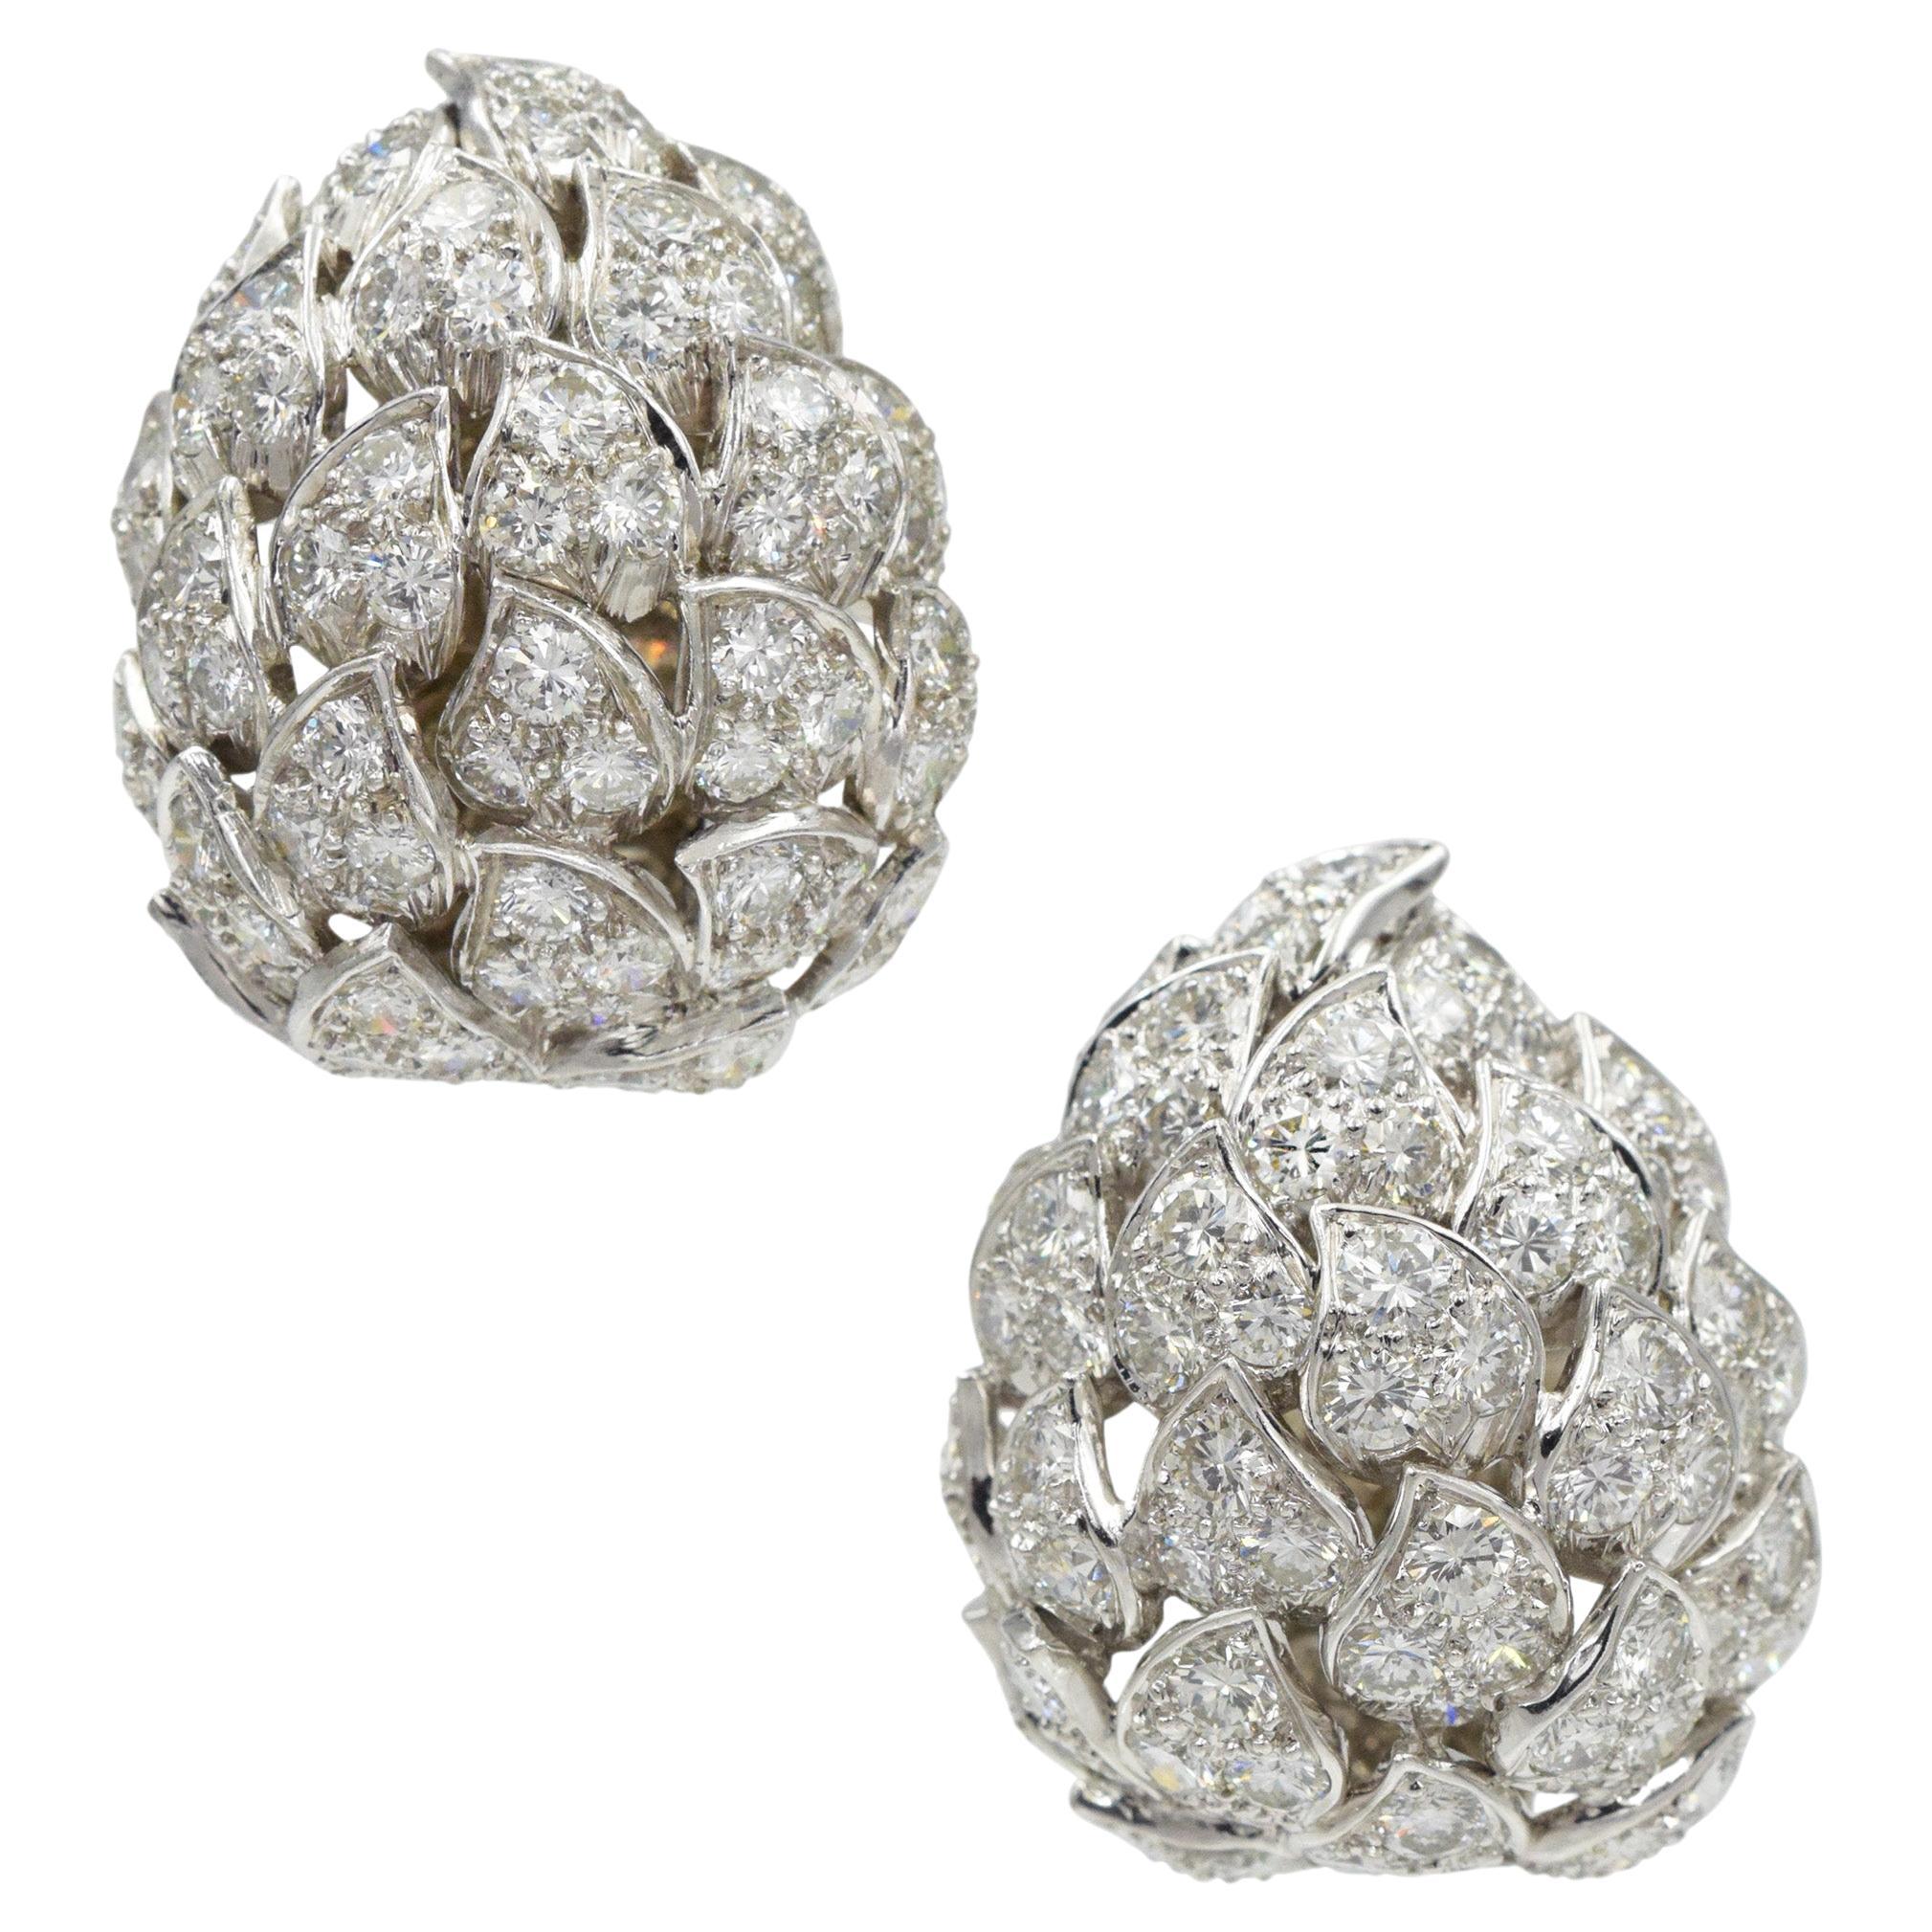 Van Cleef and Arpels diamond cufflinks in 18k white gold and platinum. The cufflinks feature openwork foliate design. The leaves are set with 170 of
round brilliant cutdiamonds with total weight of approximately 12.00, color F-G, clarity